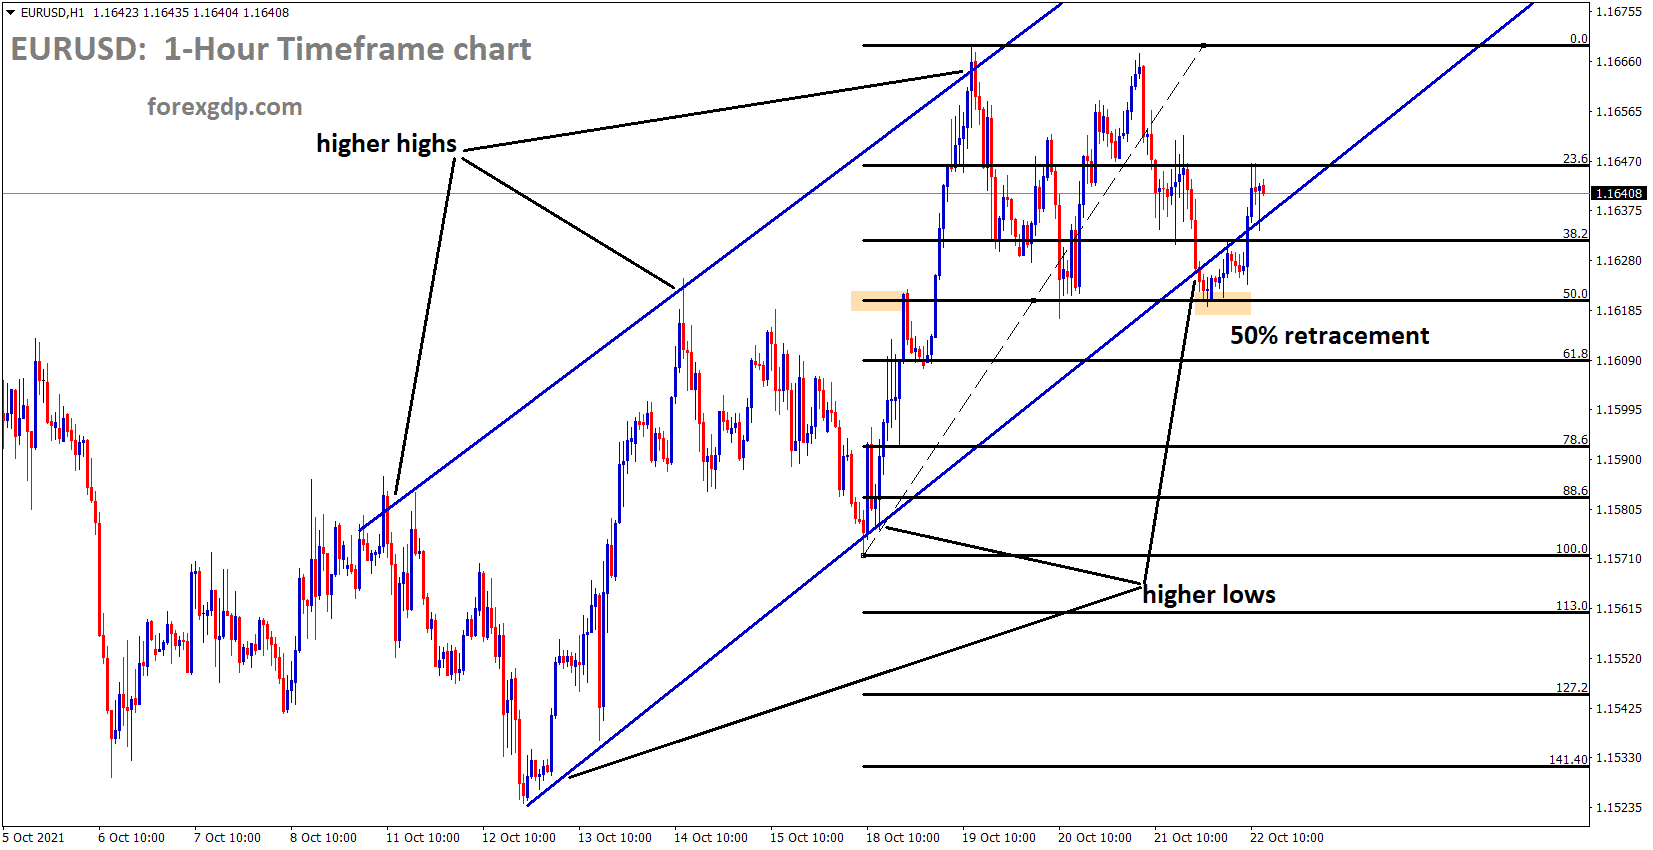 EURUSD is moving in an Ascending channel and the price has rebounded from the 50 retracement level